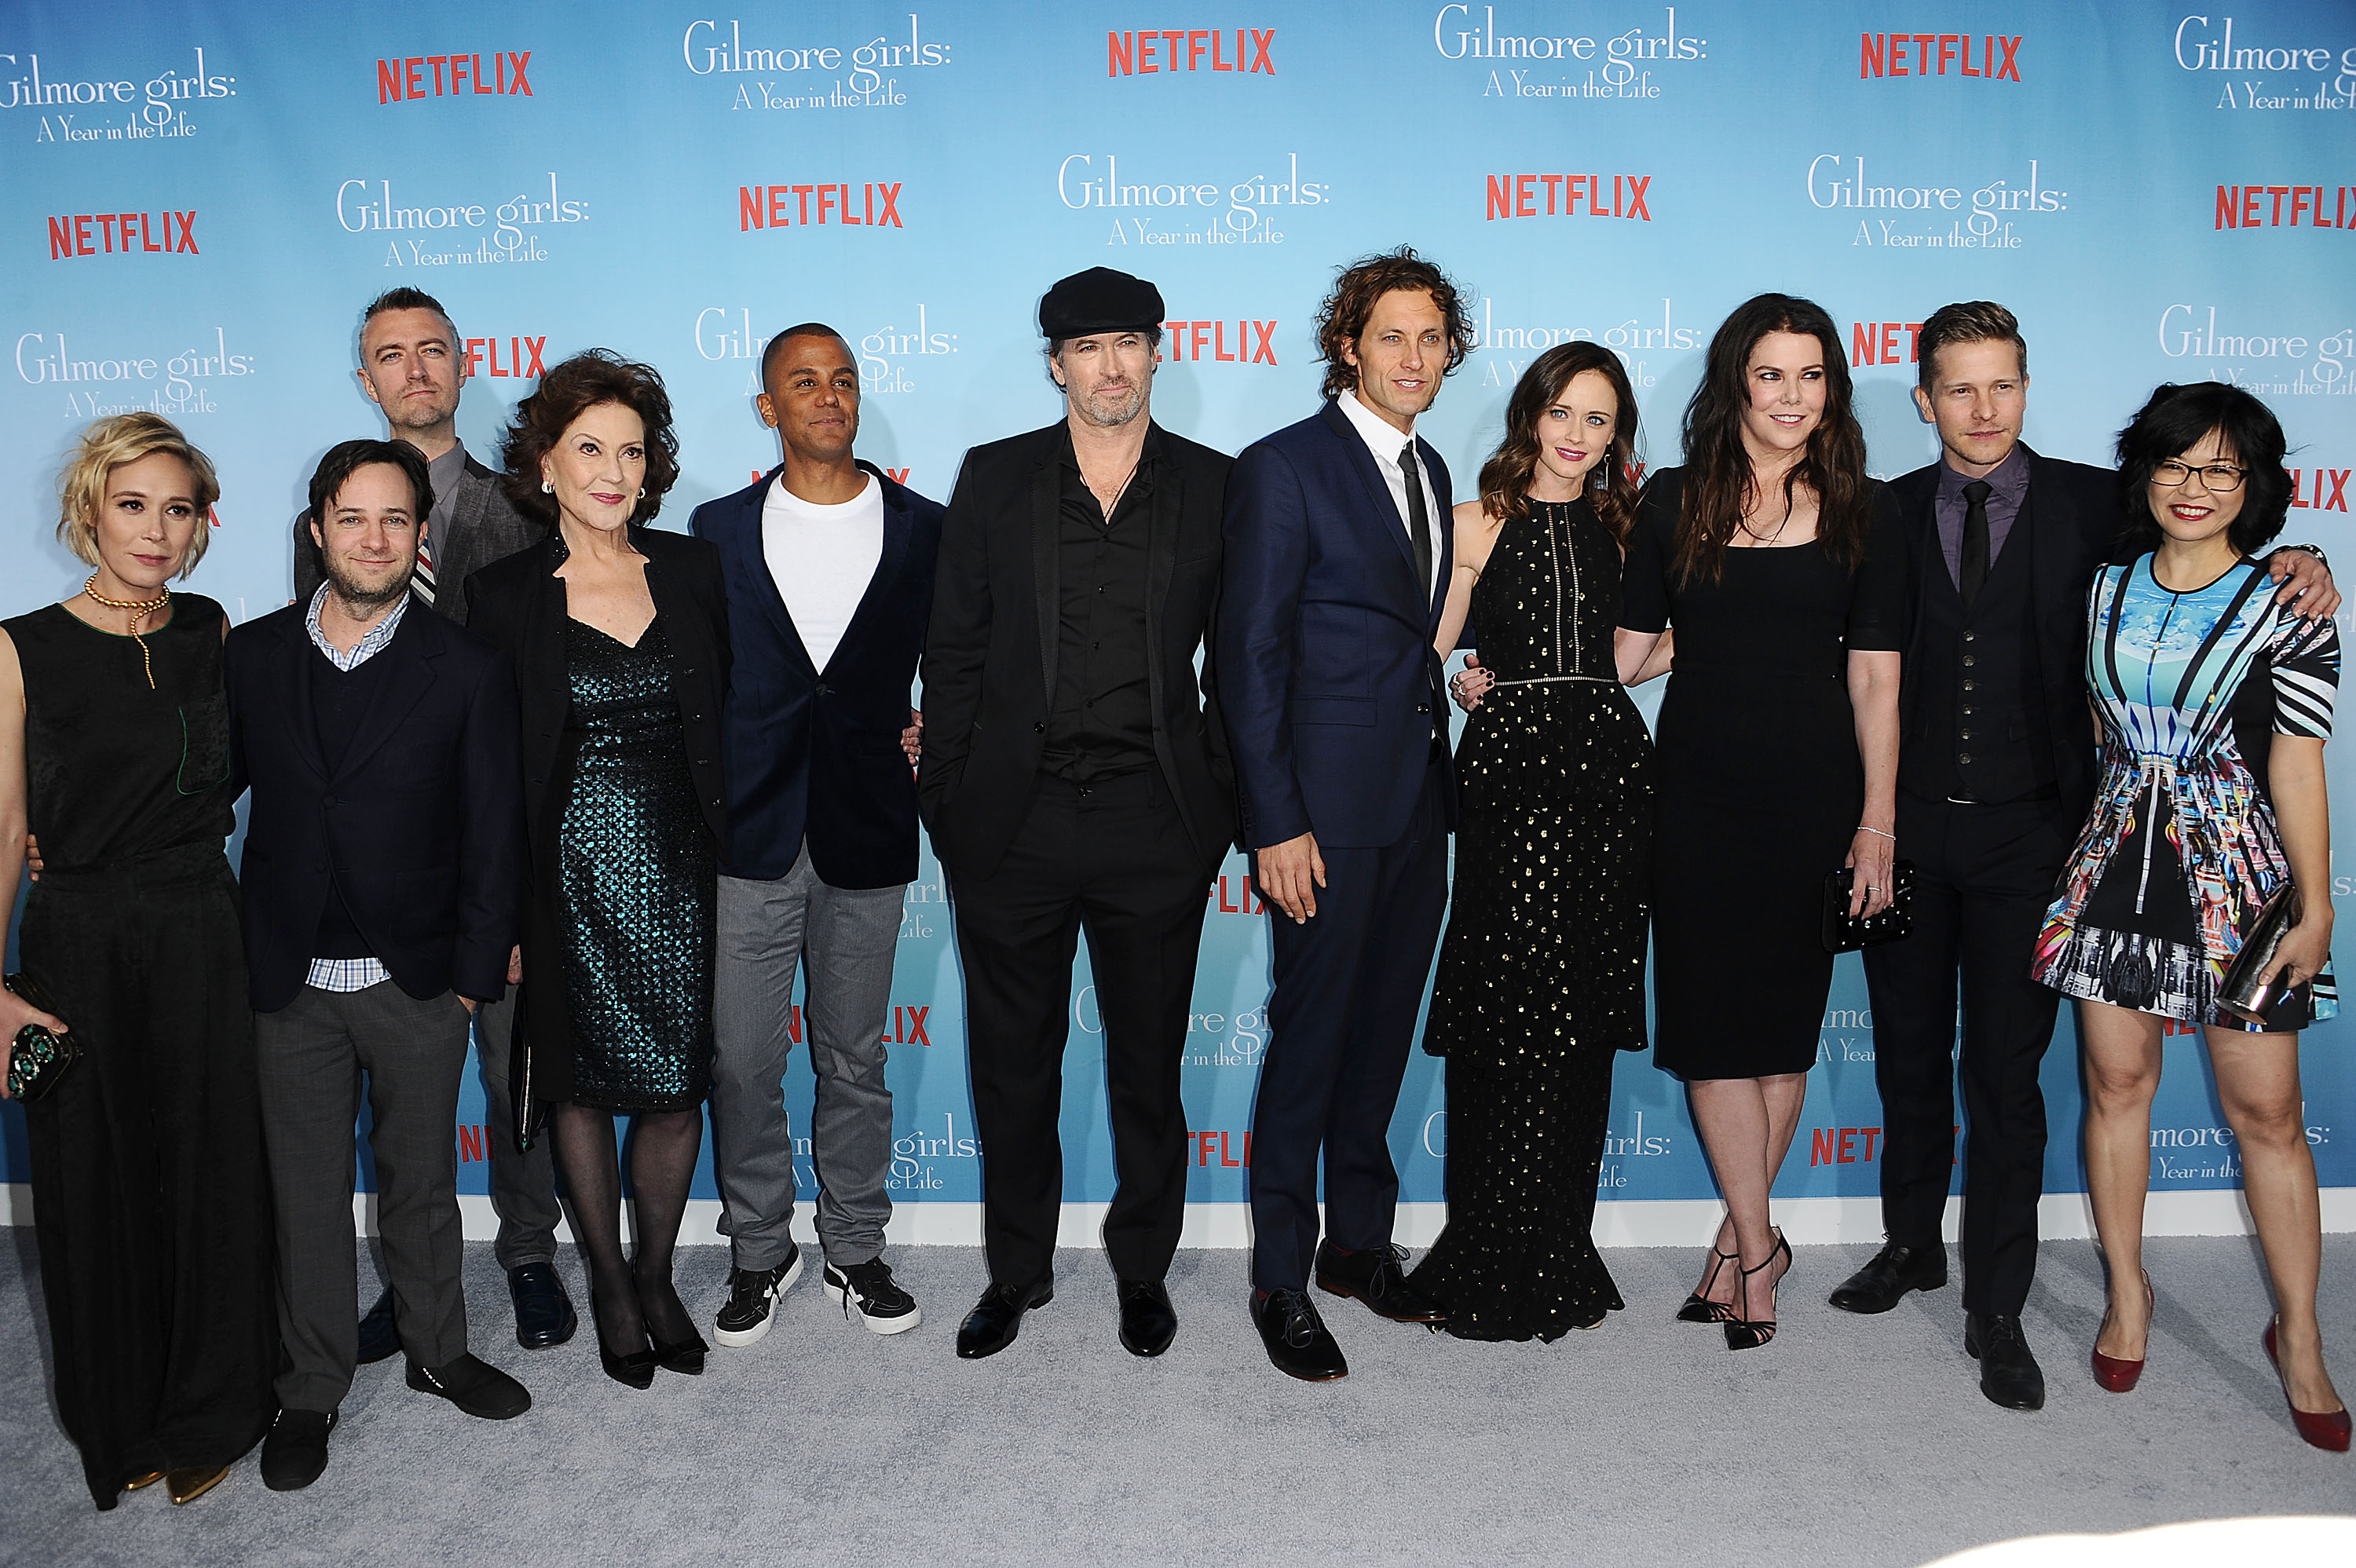 Liza Well, Danny Strong, Sean Gunn, Kelly Bishop, Yanic Truesdale, Scott Patterson, Tanc Sade, Alexis Bledel, Lauren Graham, Matt Czuchry and Keiko Agena attend the premiere of "Gilmore Girls: A Year in the Life.' Fans hope for a second 'Gilmore Girls' revival season